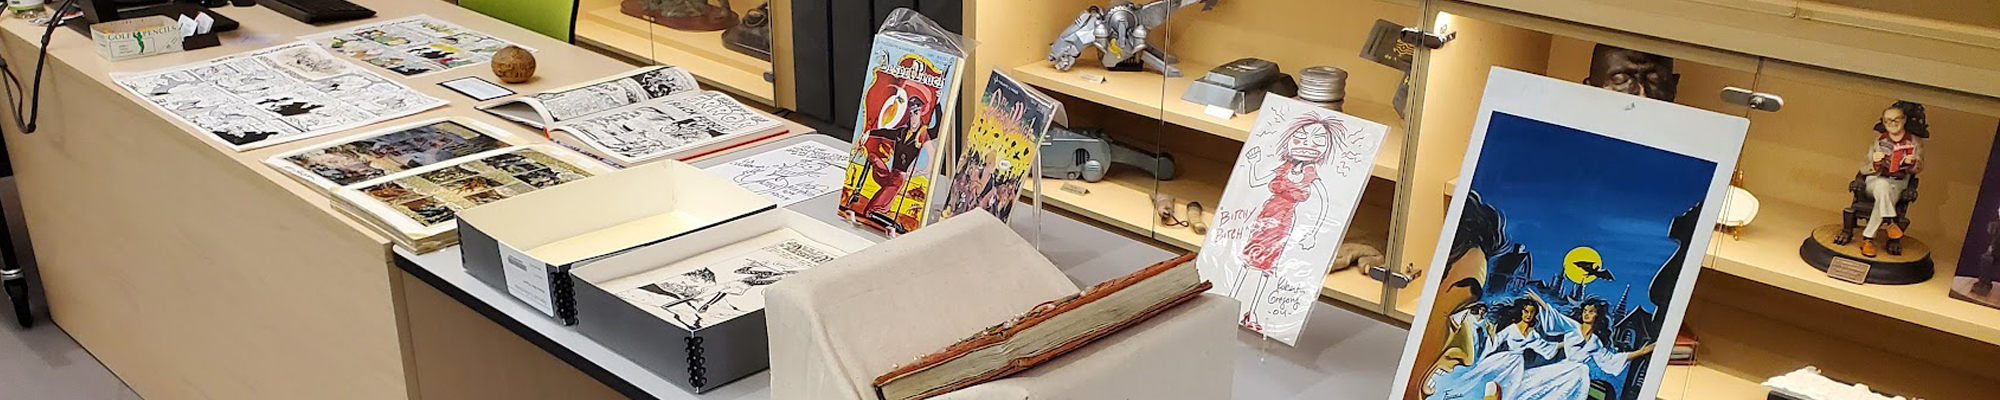 library comic archives - comics on tables